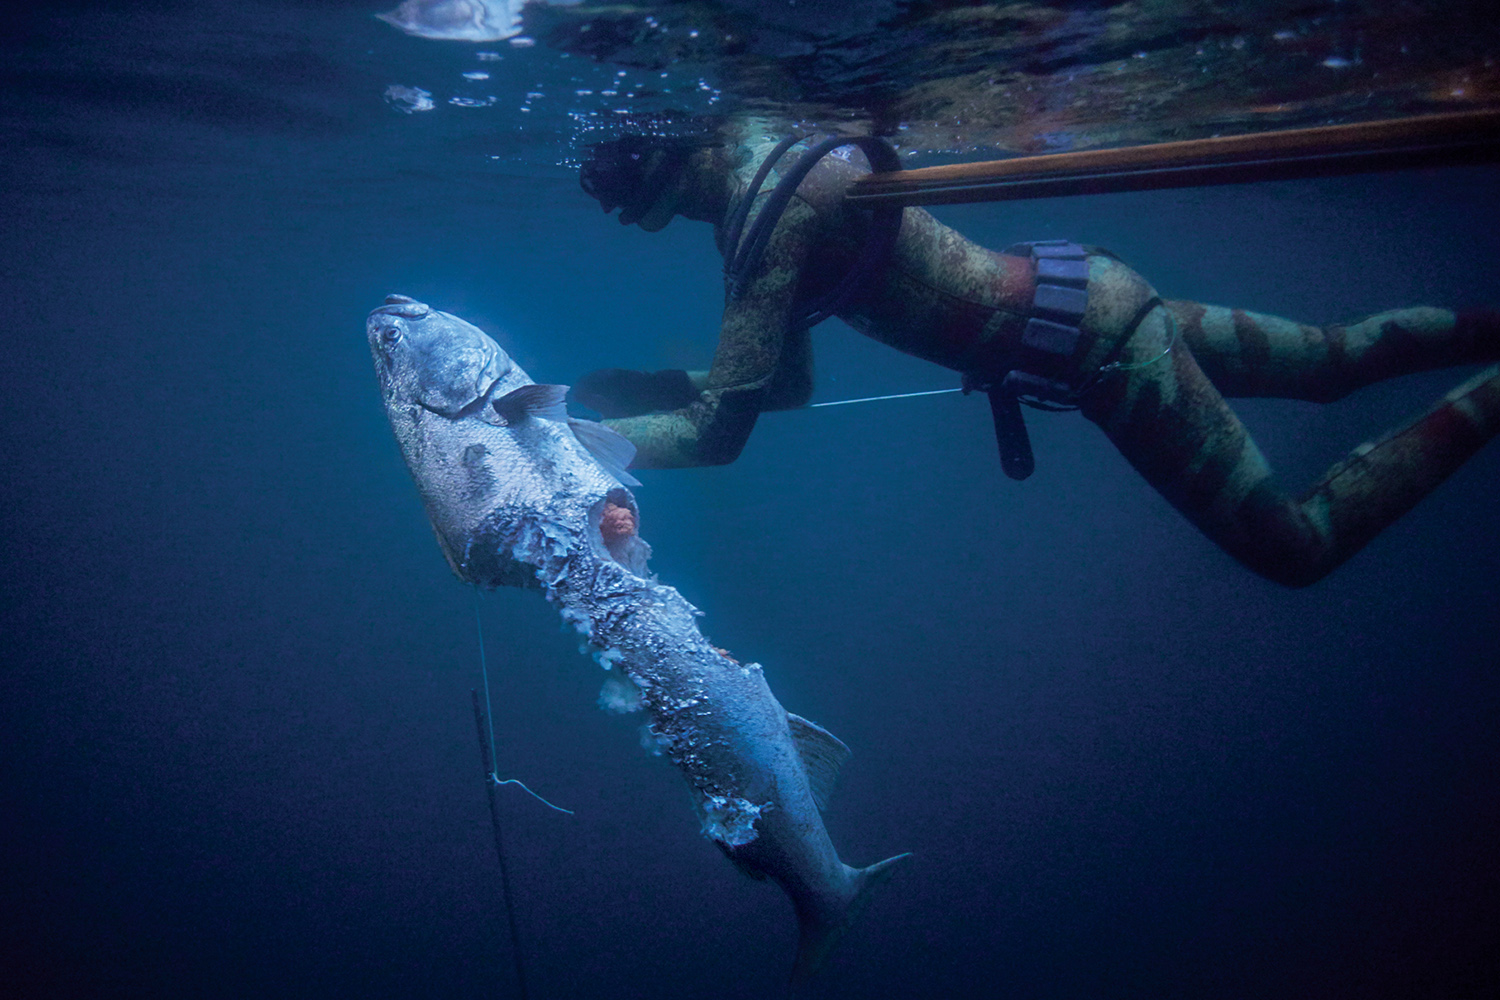 spearfisherman holds fish mostly eaten by sharks